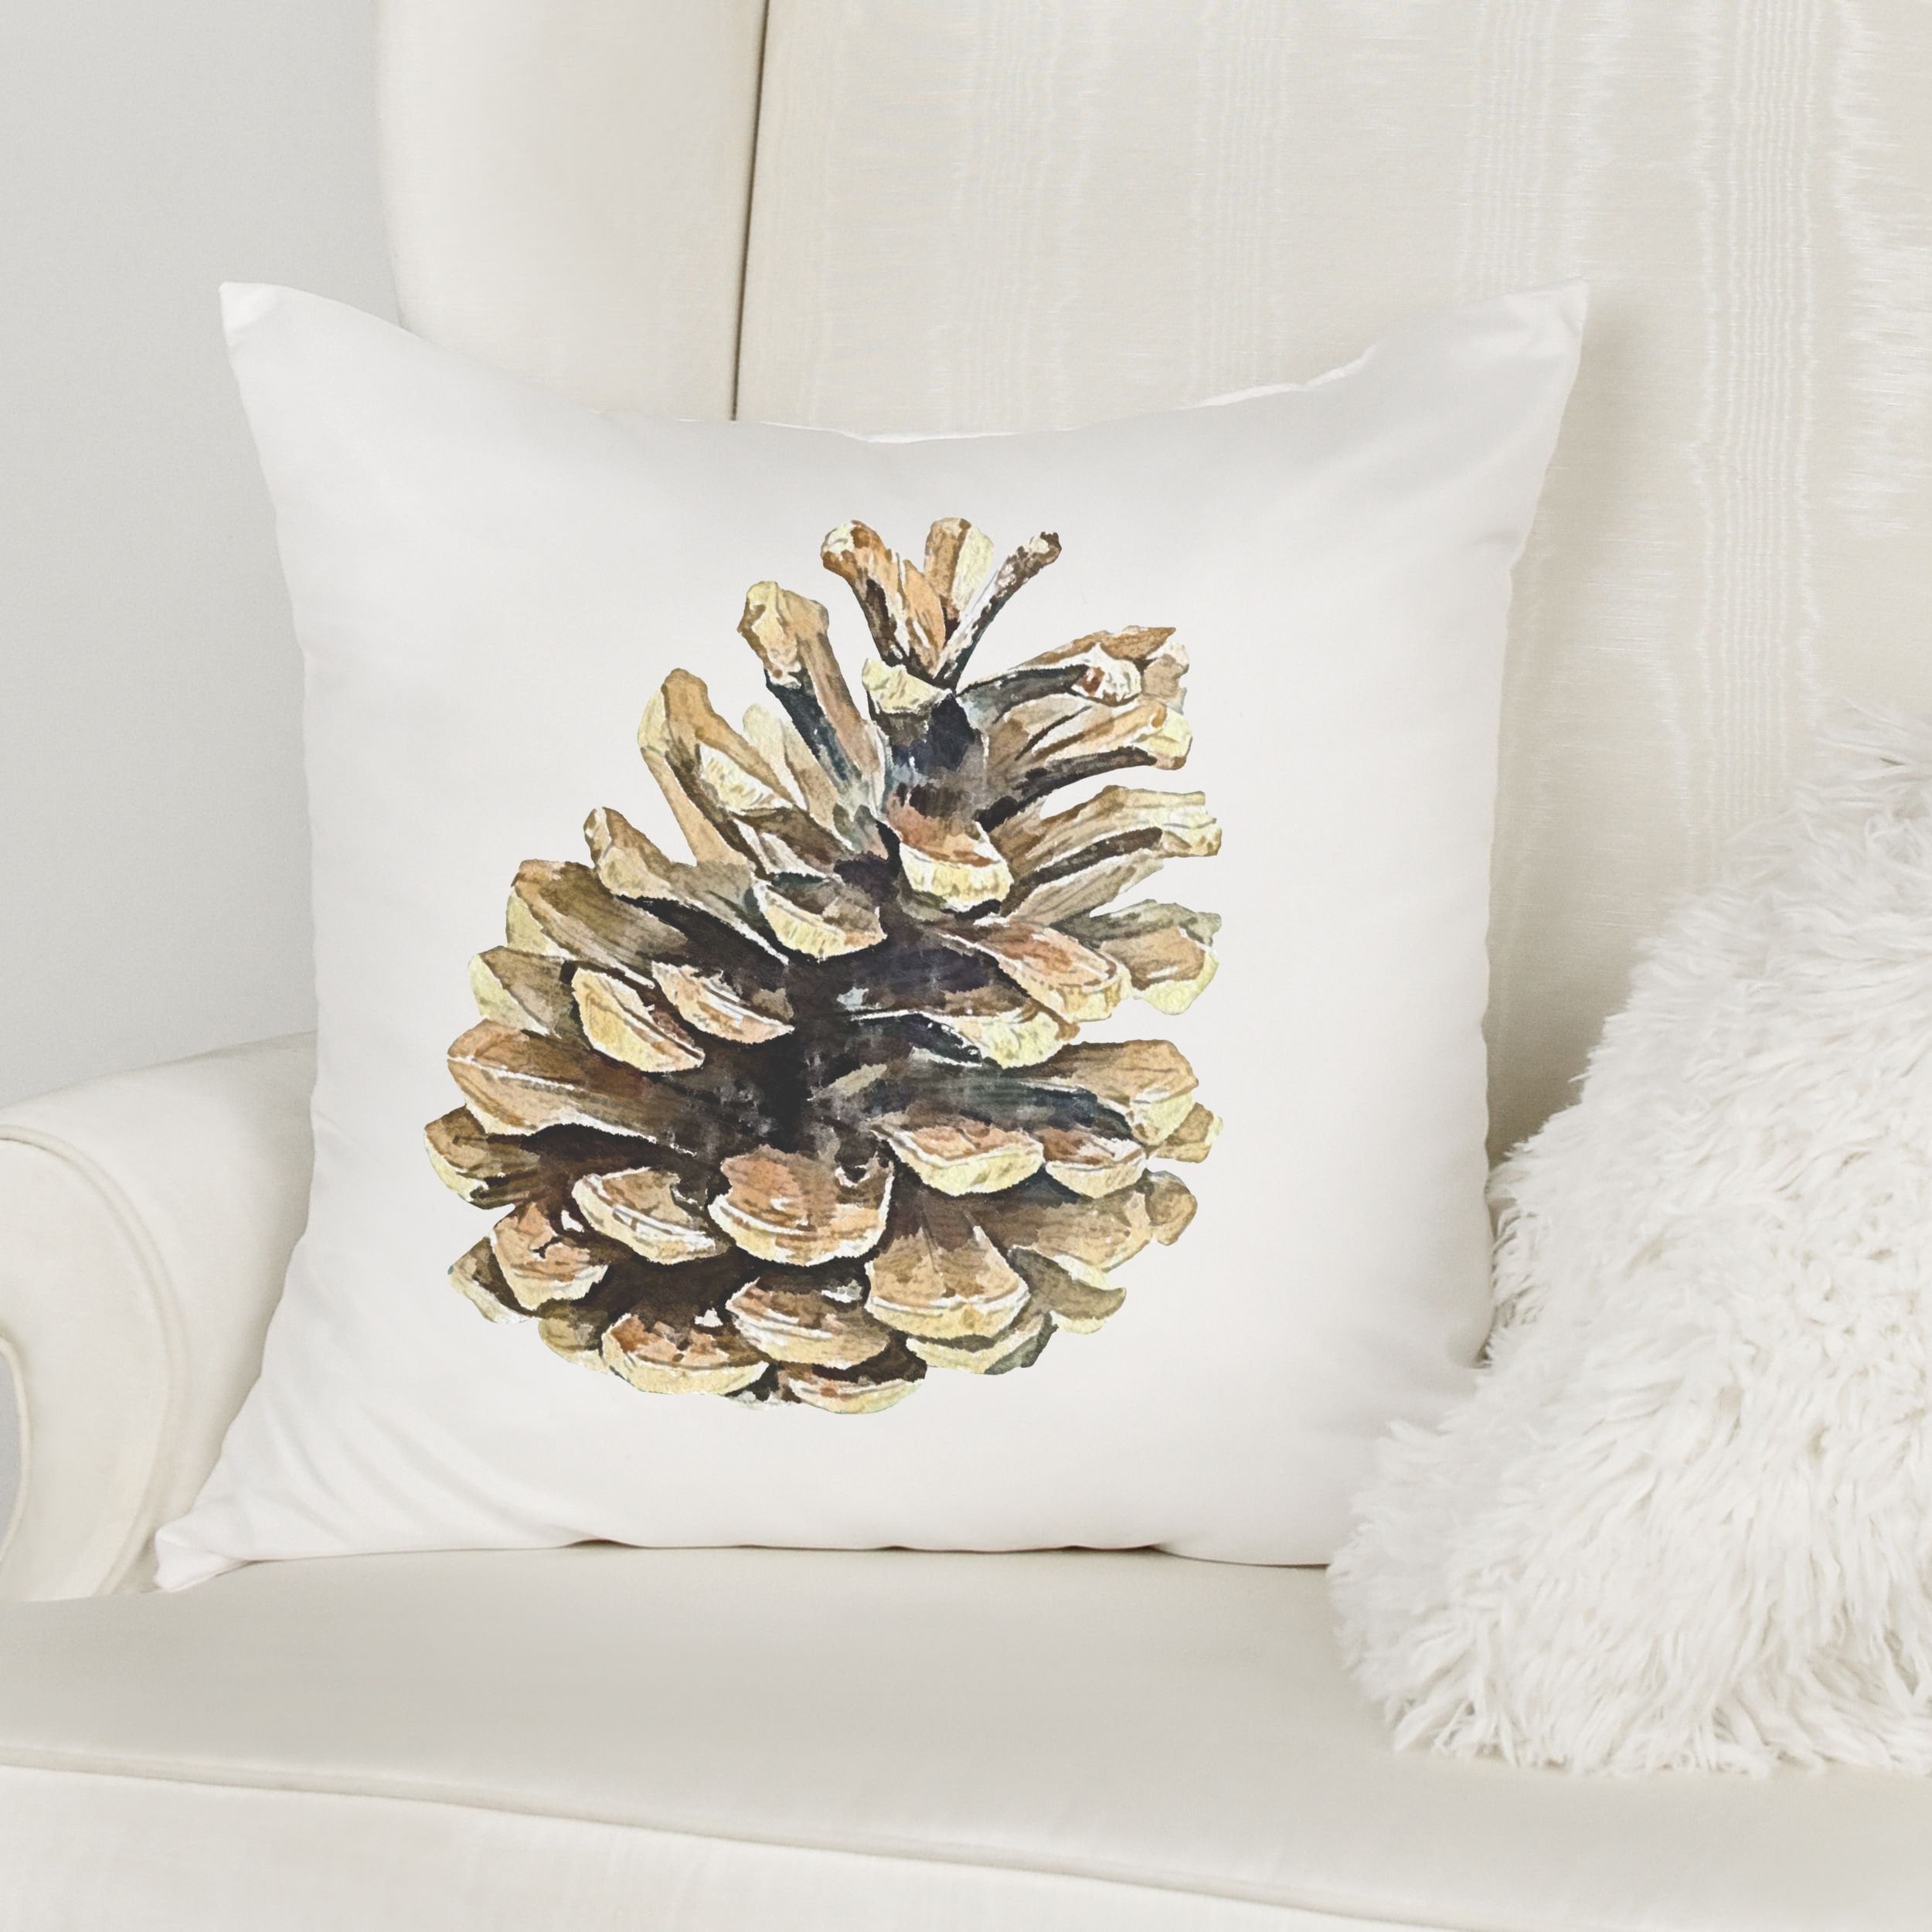 Decorative Pillows by Pine Cone Hill